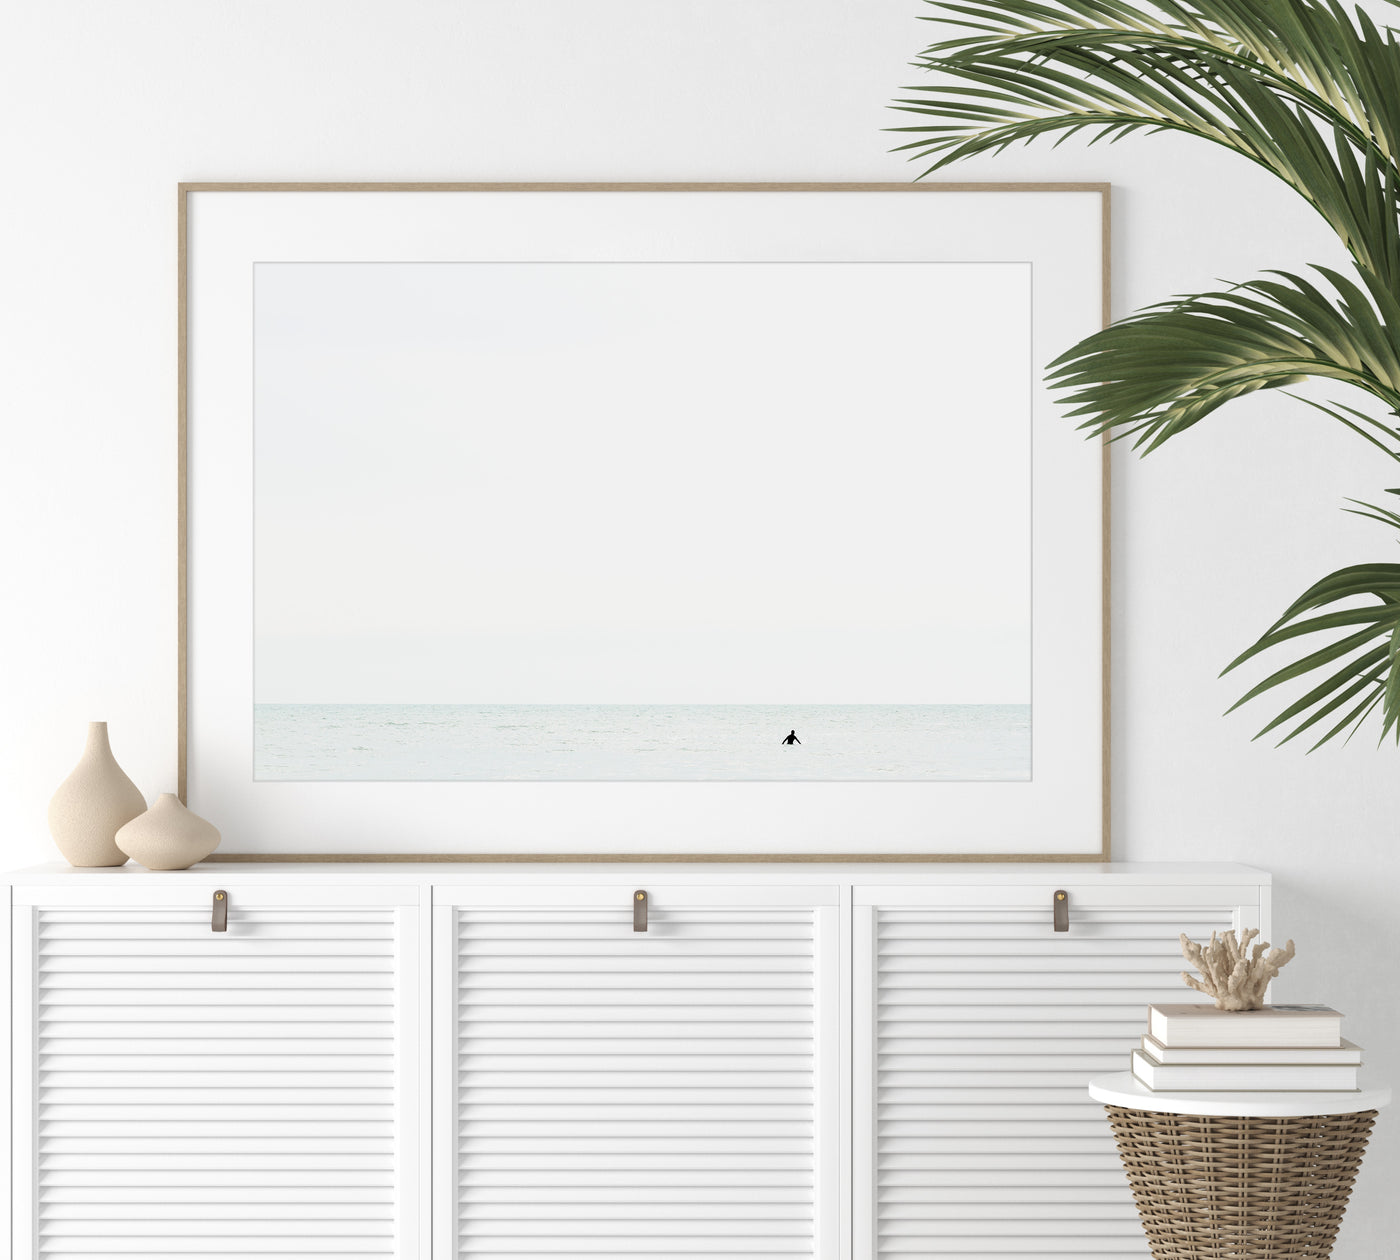 Framed surf print by Cattie Coyle Photography